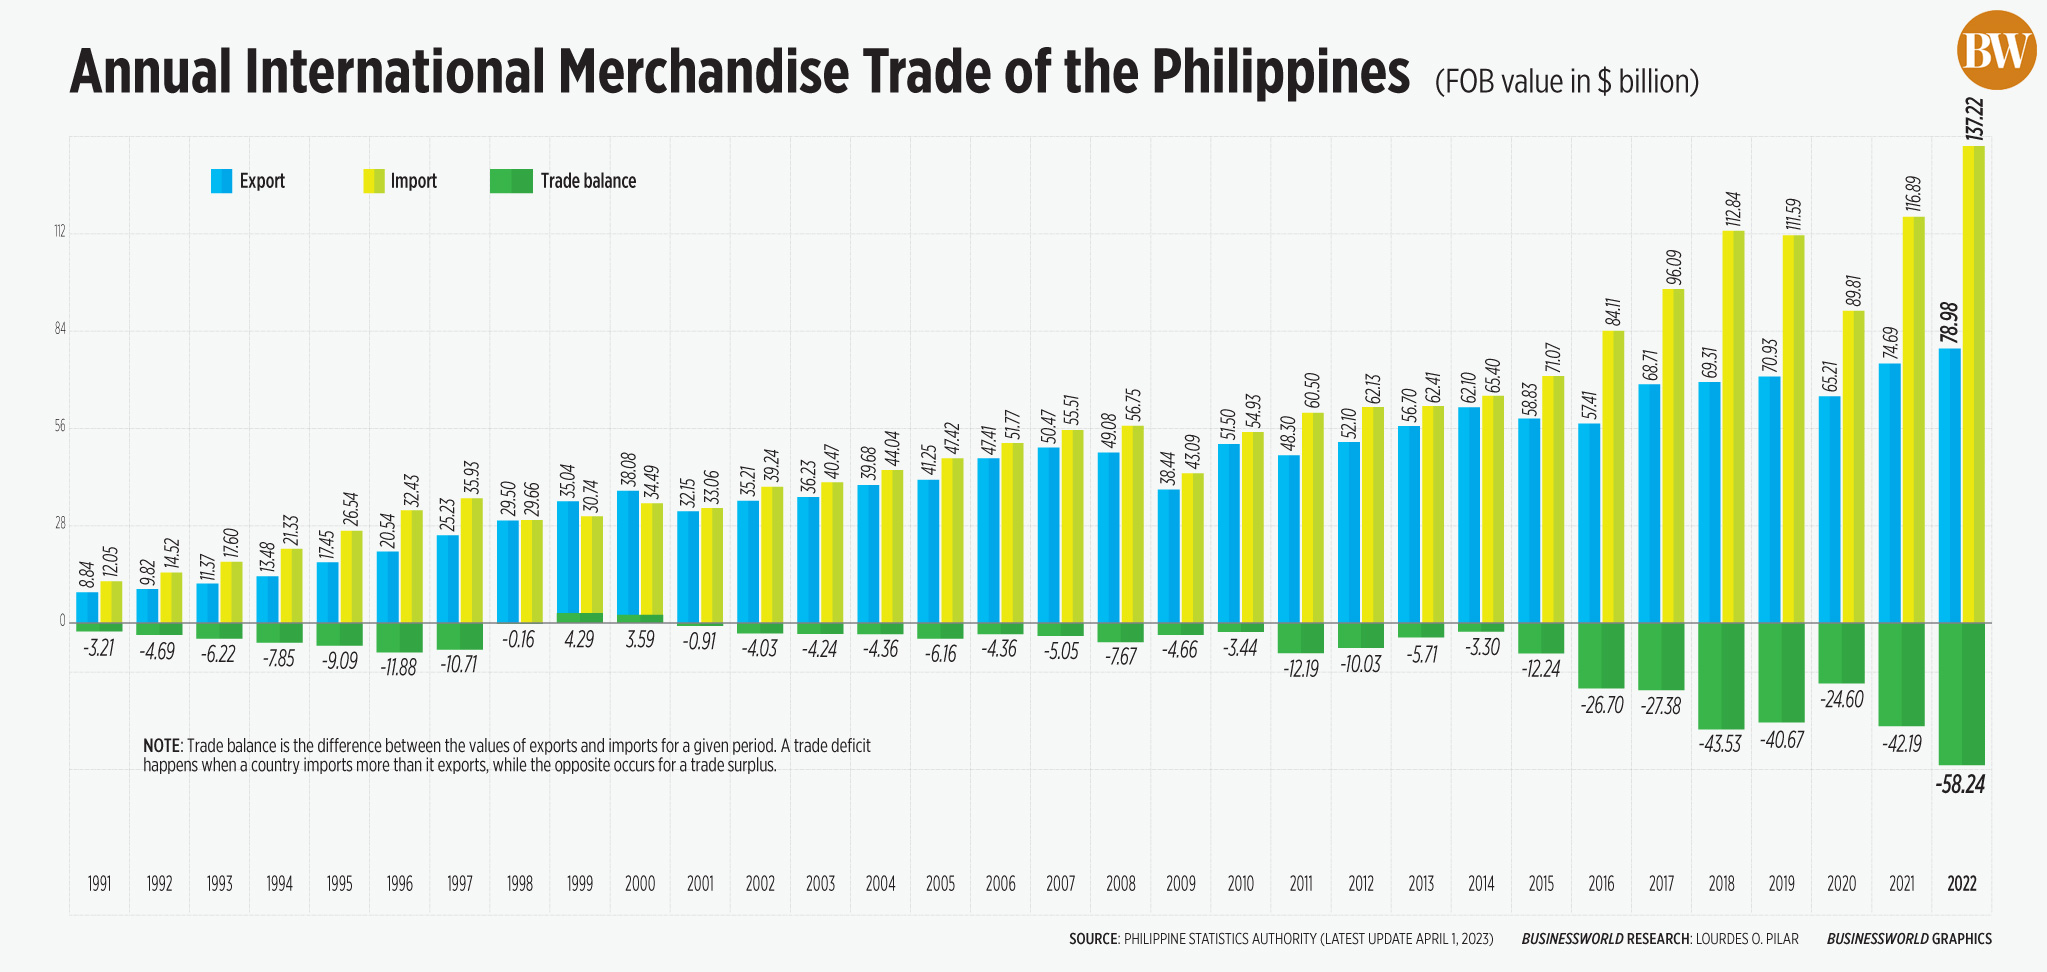 Annual International Merchandise Trade of the Philippines